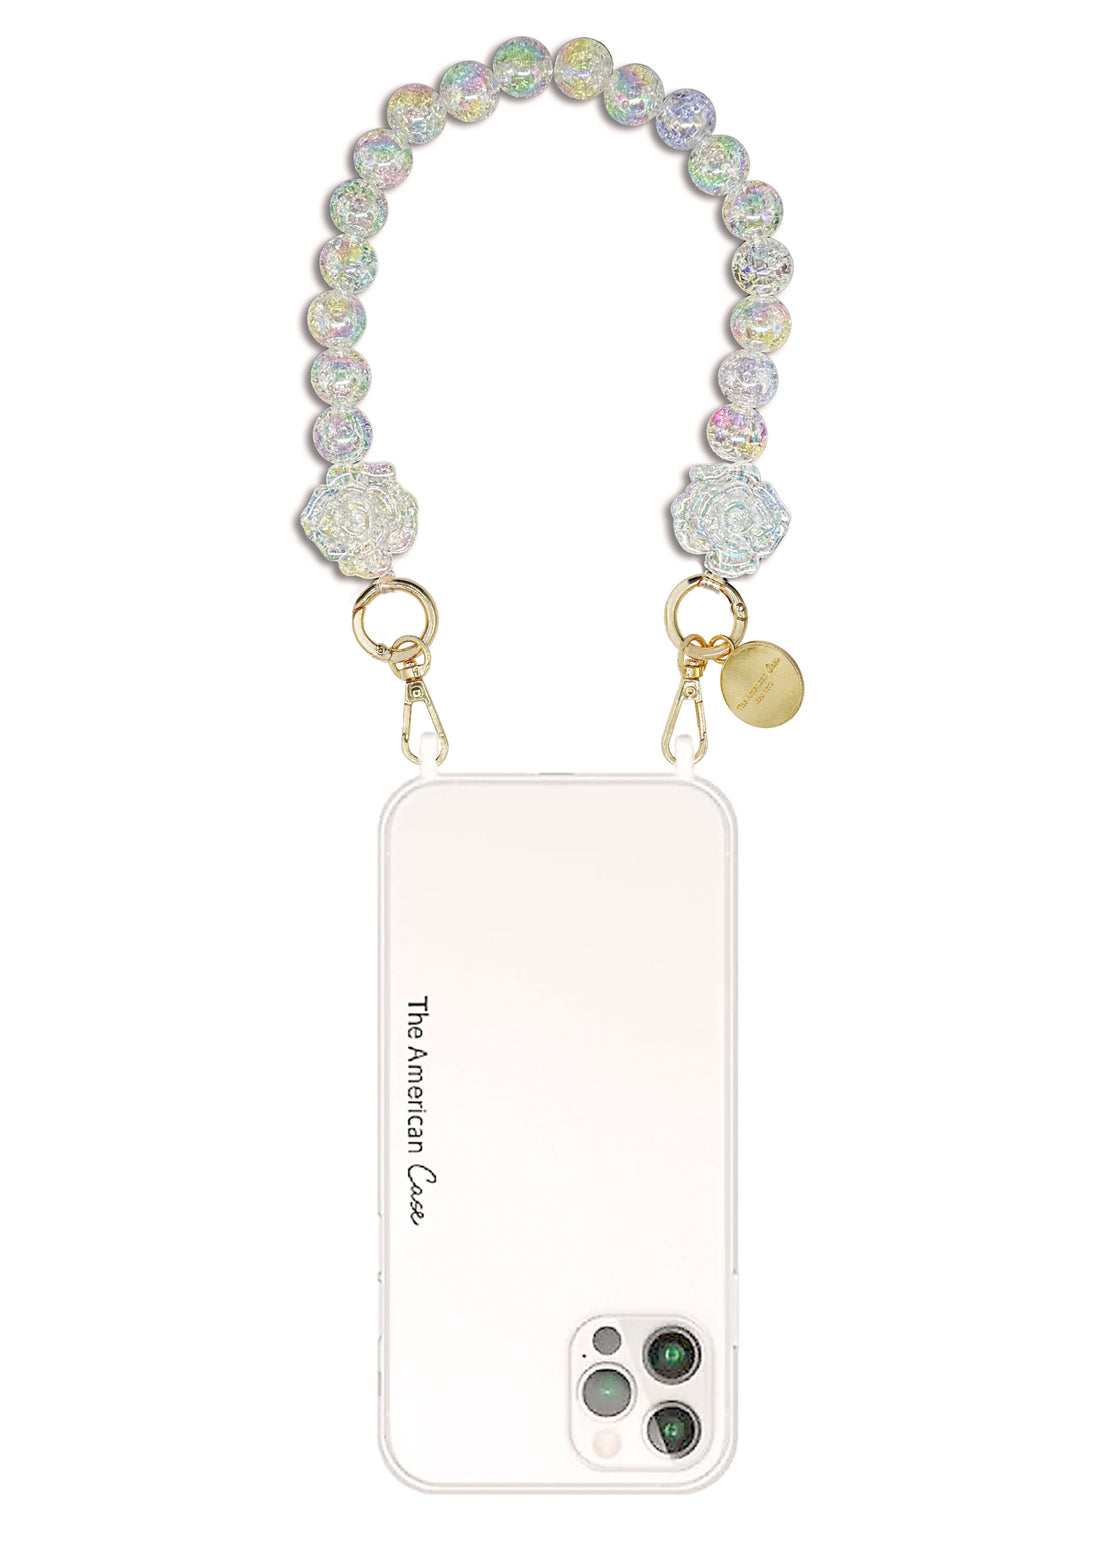 Everly - Glittery Crystal Beads Bracelet Short Phone Chain with Golden Carabiners